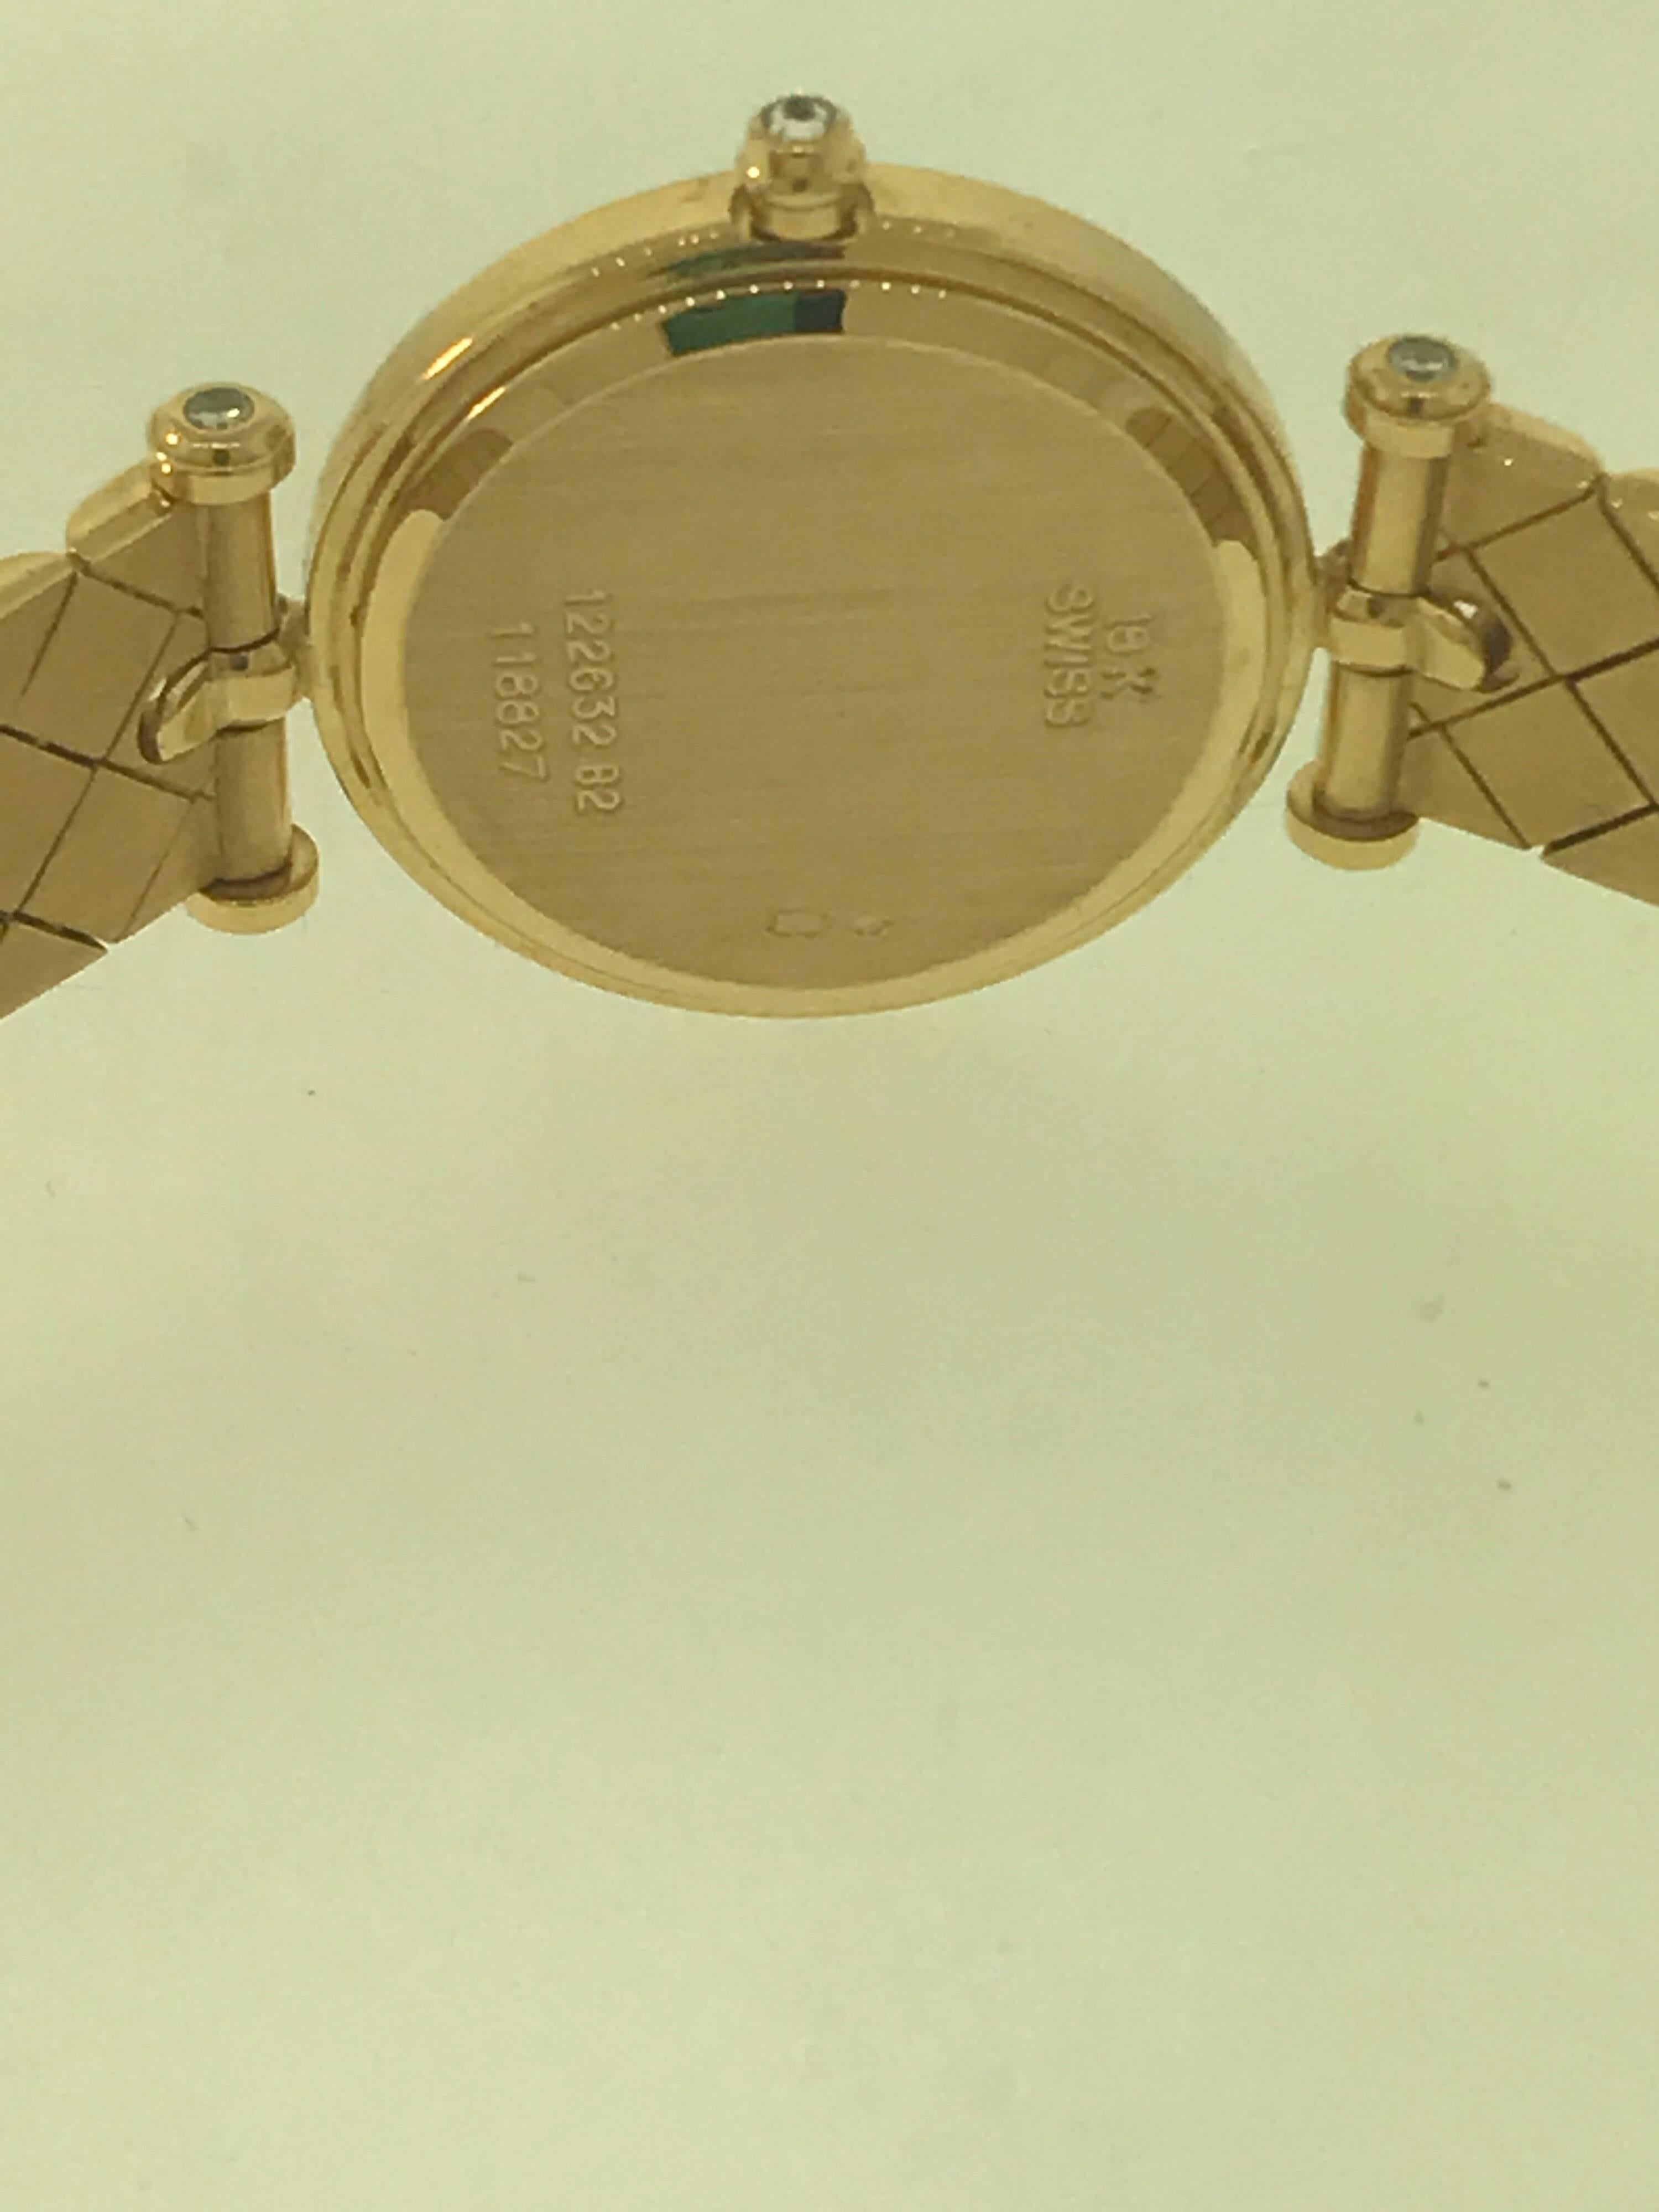 Van Cleef & Arpels Classique Yellow Gold Diamond Bezel and Bracelet Ladies Watch In Excellent Condition For Sale In New York, NY